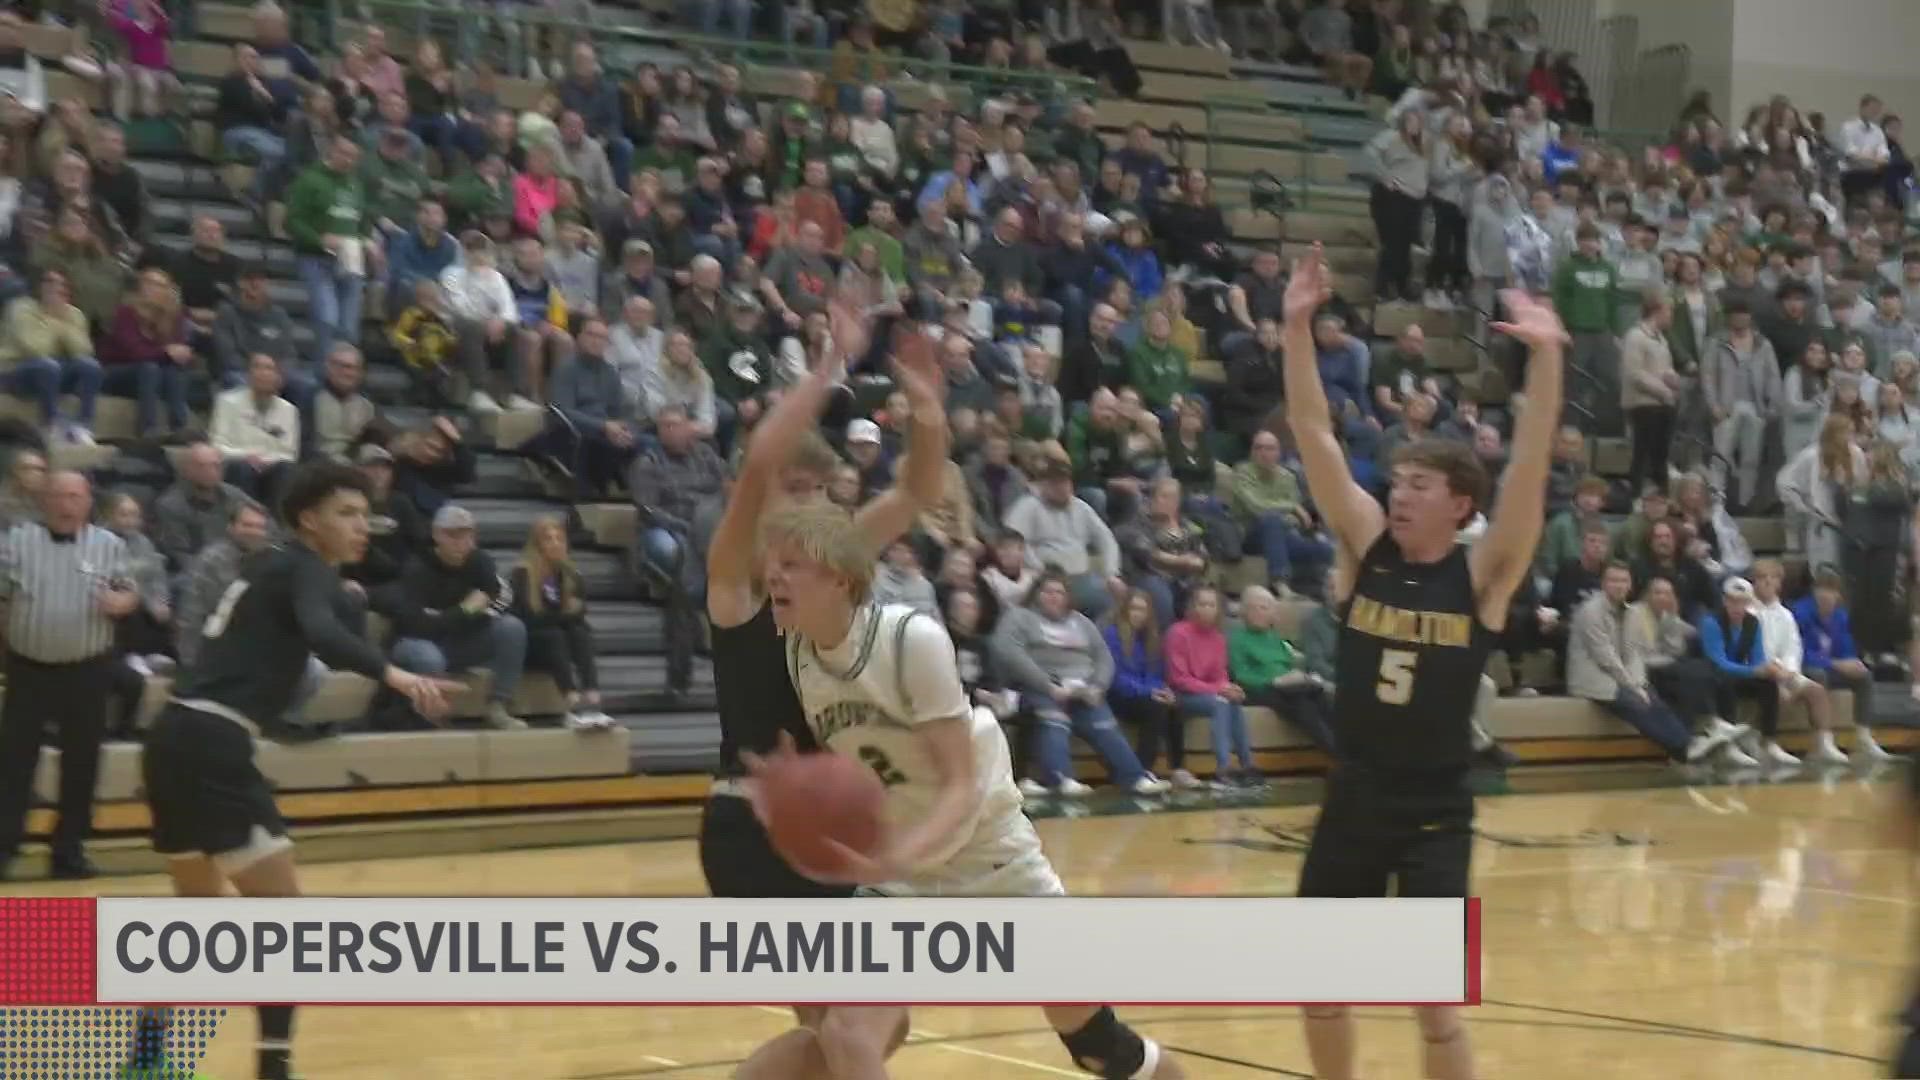 Hamilton wins first conference title since 1988 with 57-54 win over Coopersville